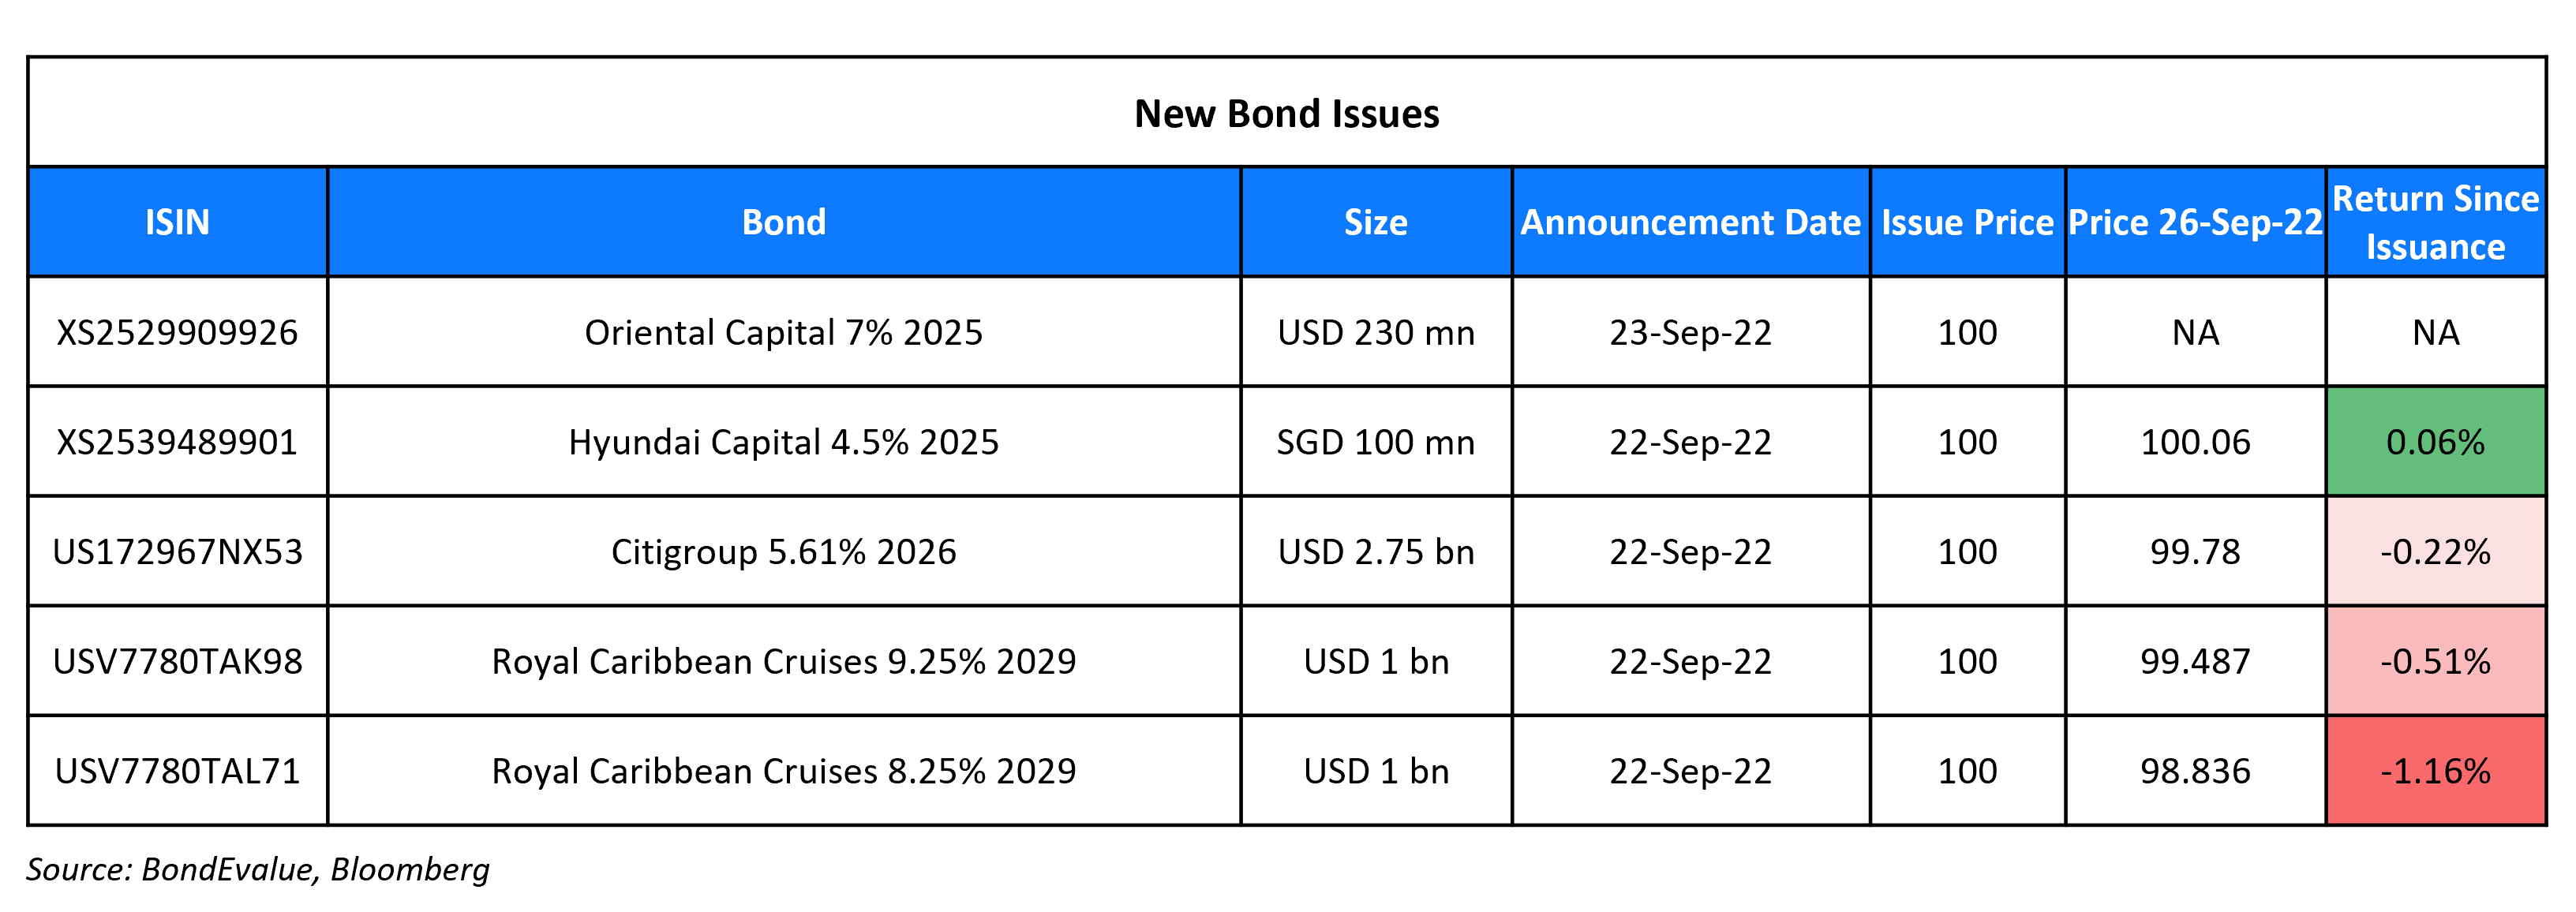 New Bond Issues 26 Sep 22